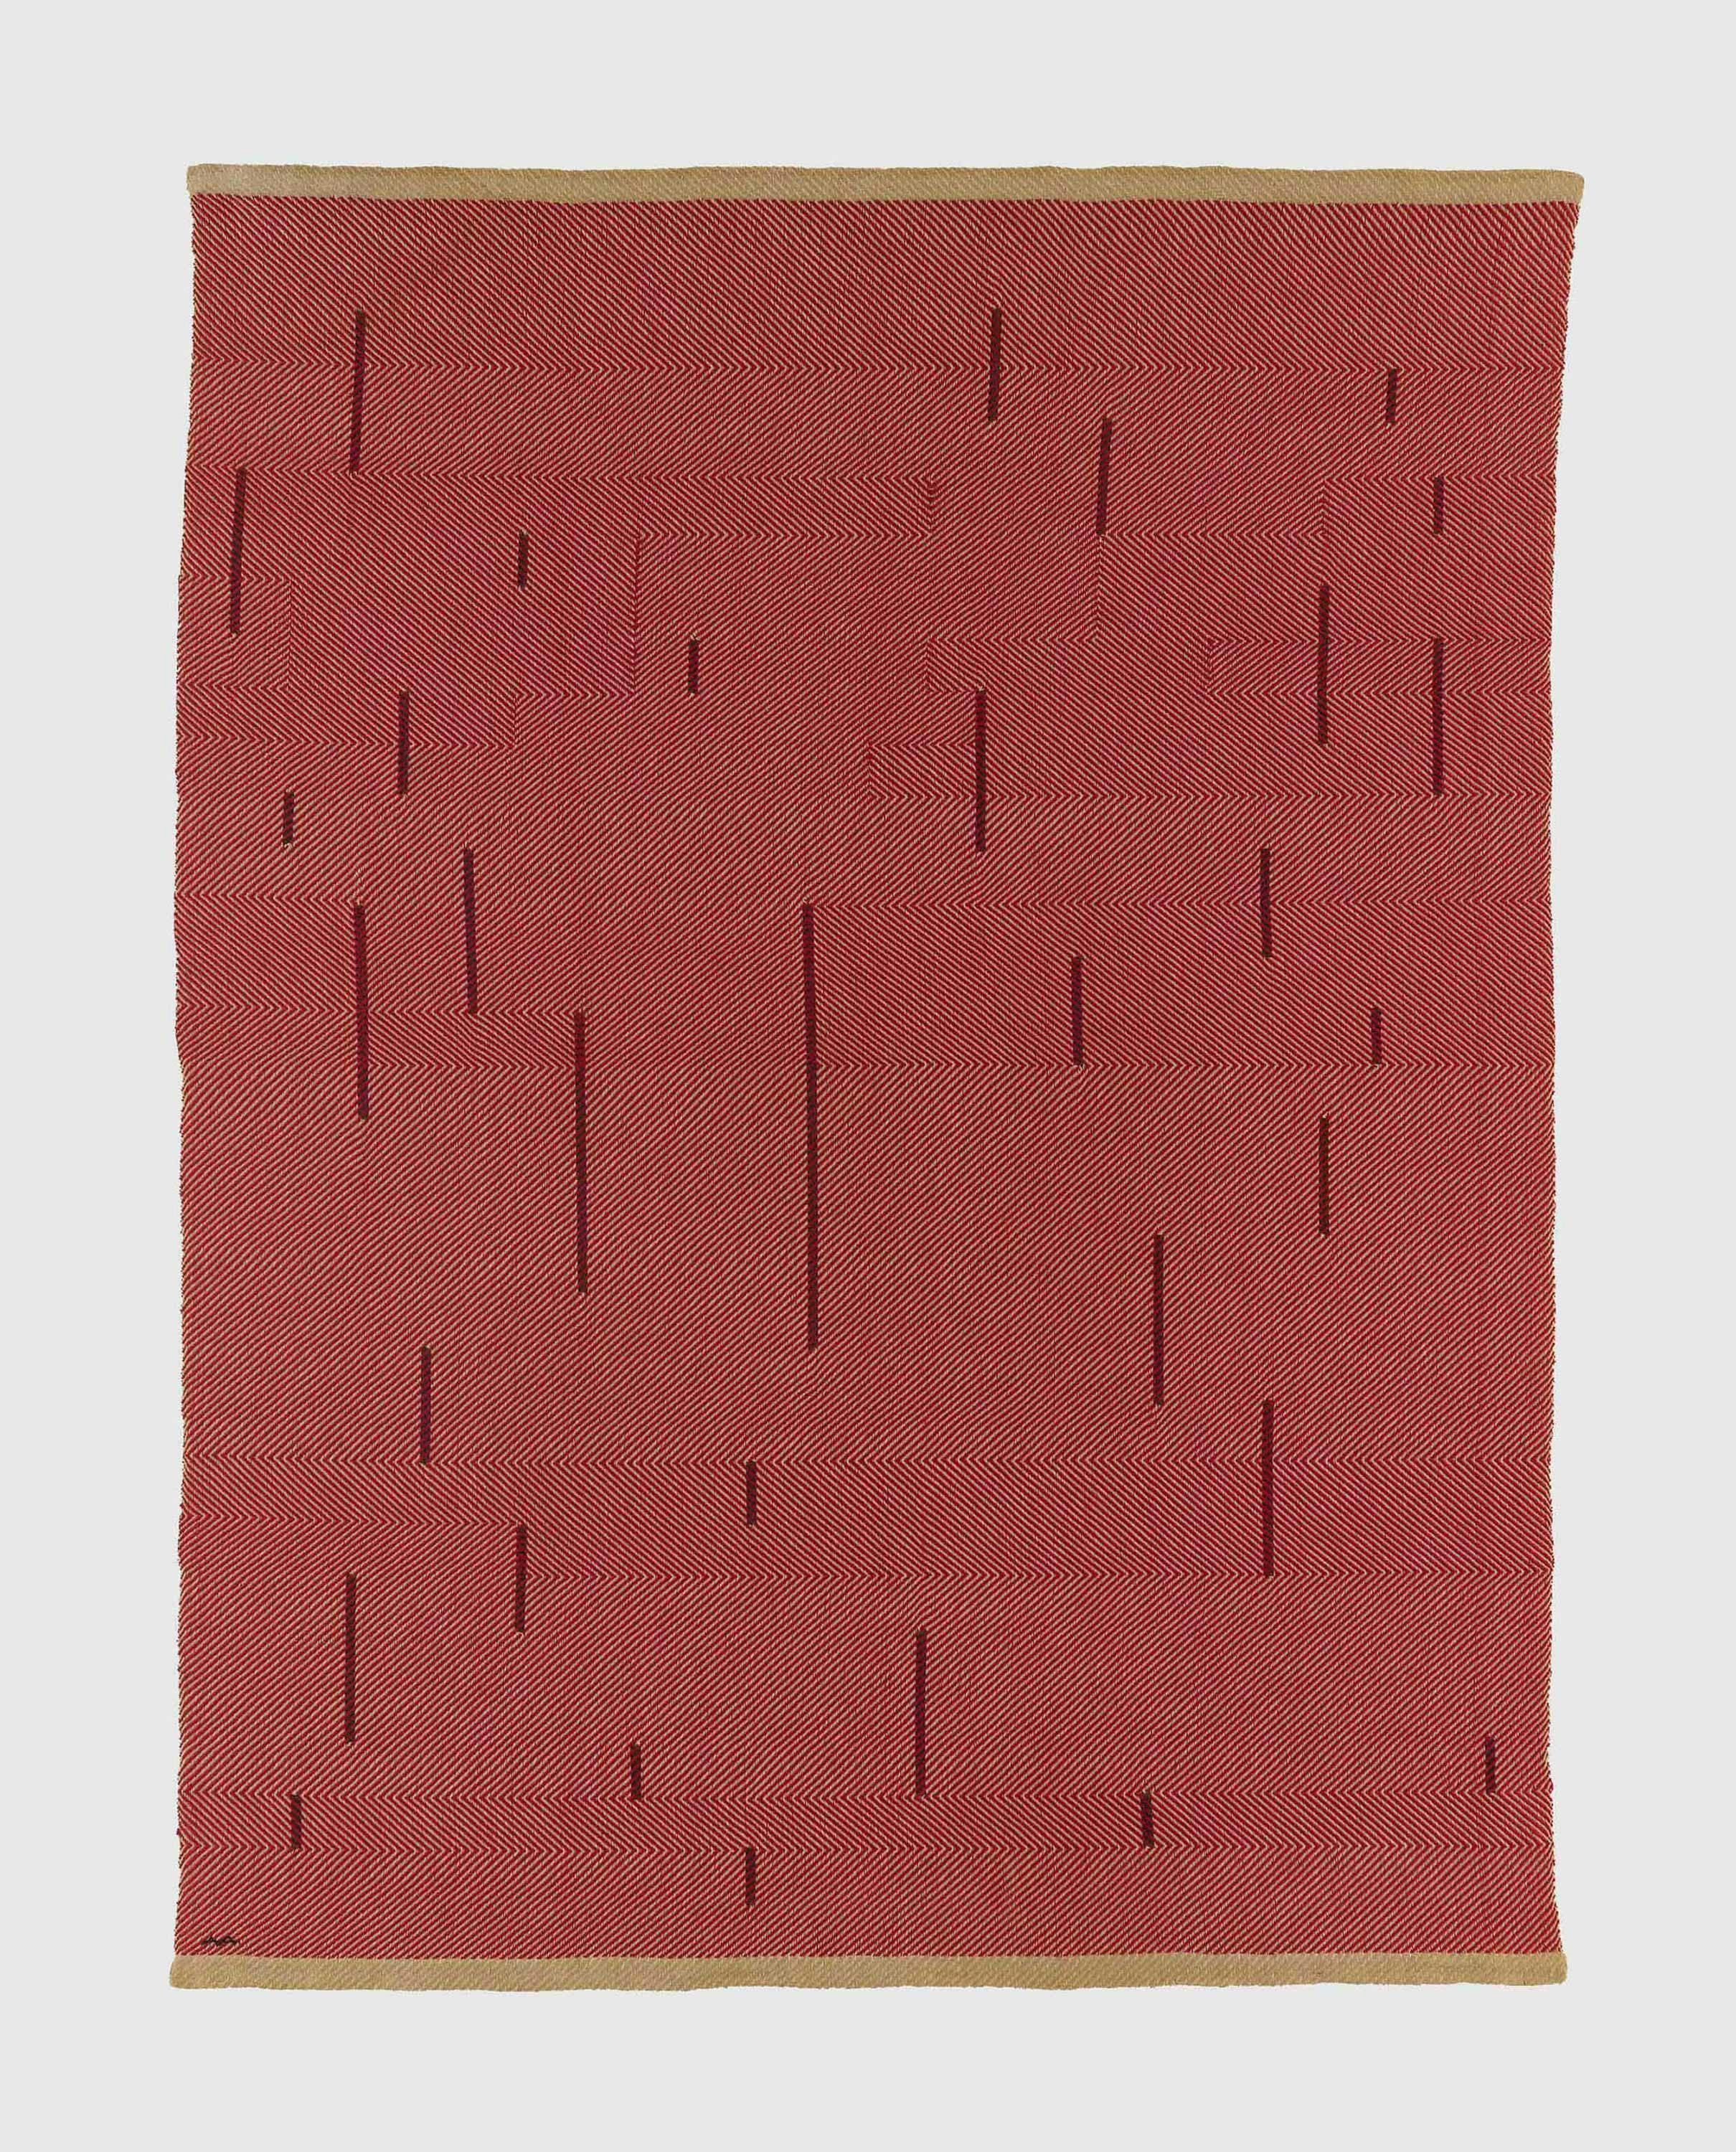 A textile by Anni Albers, titled With Verticals, dated 1946.